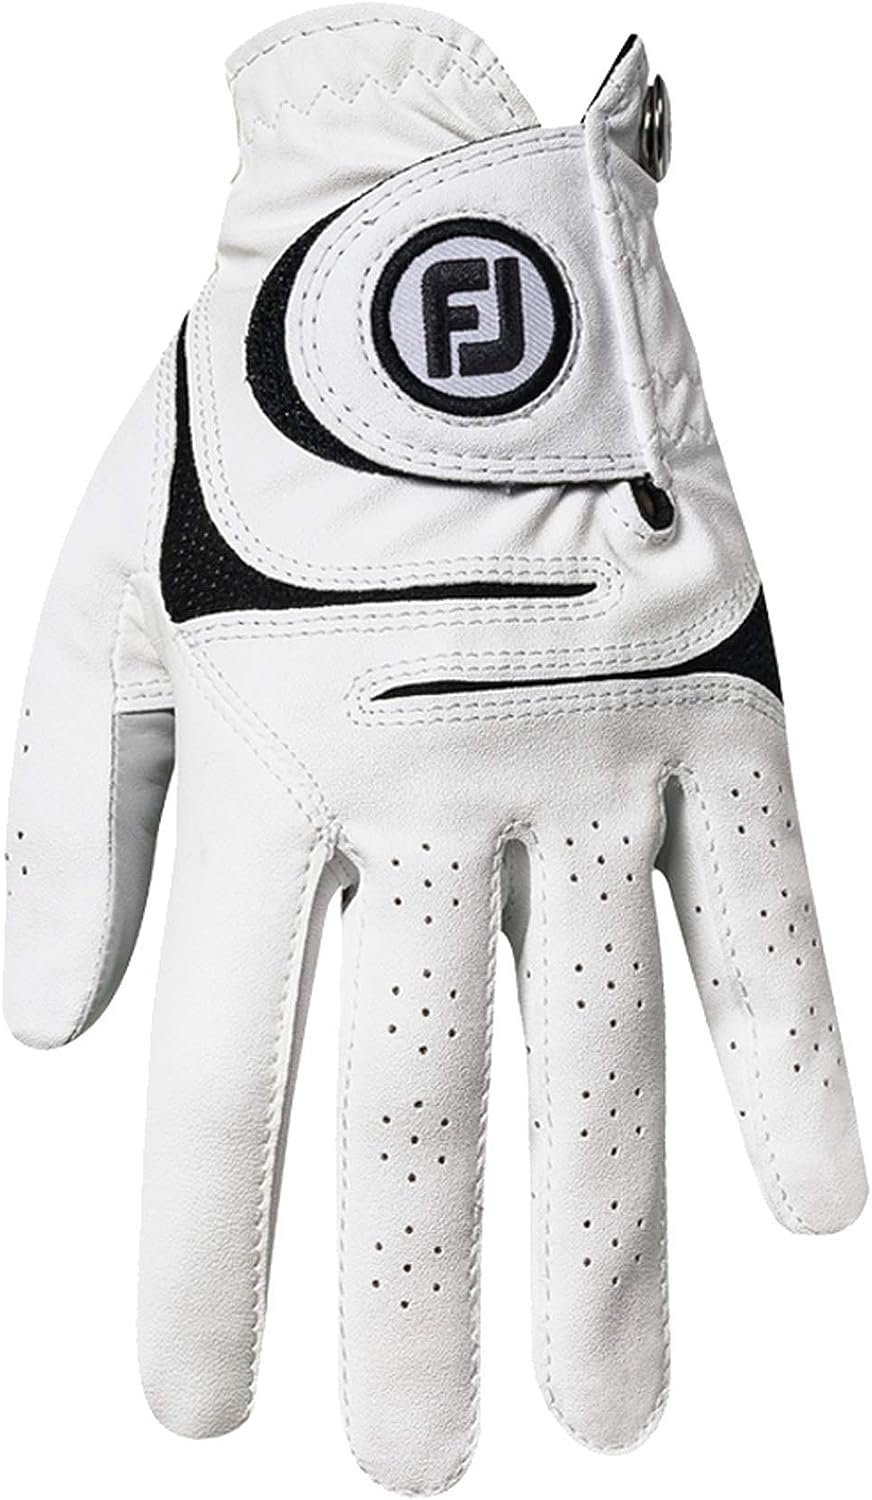 Golf Glove Showdown: 5 Products Reviewed & Compared